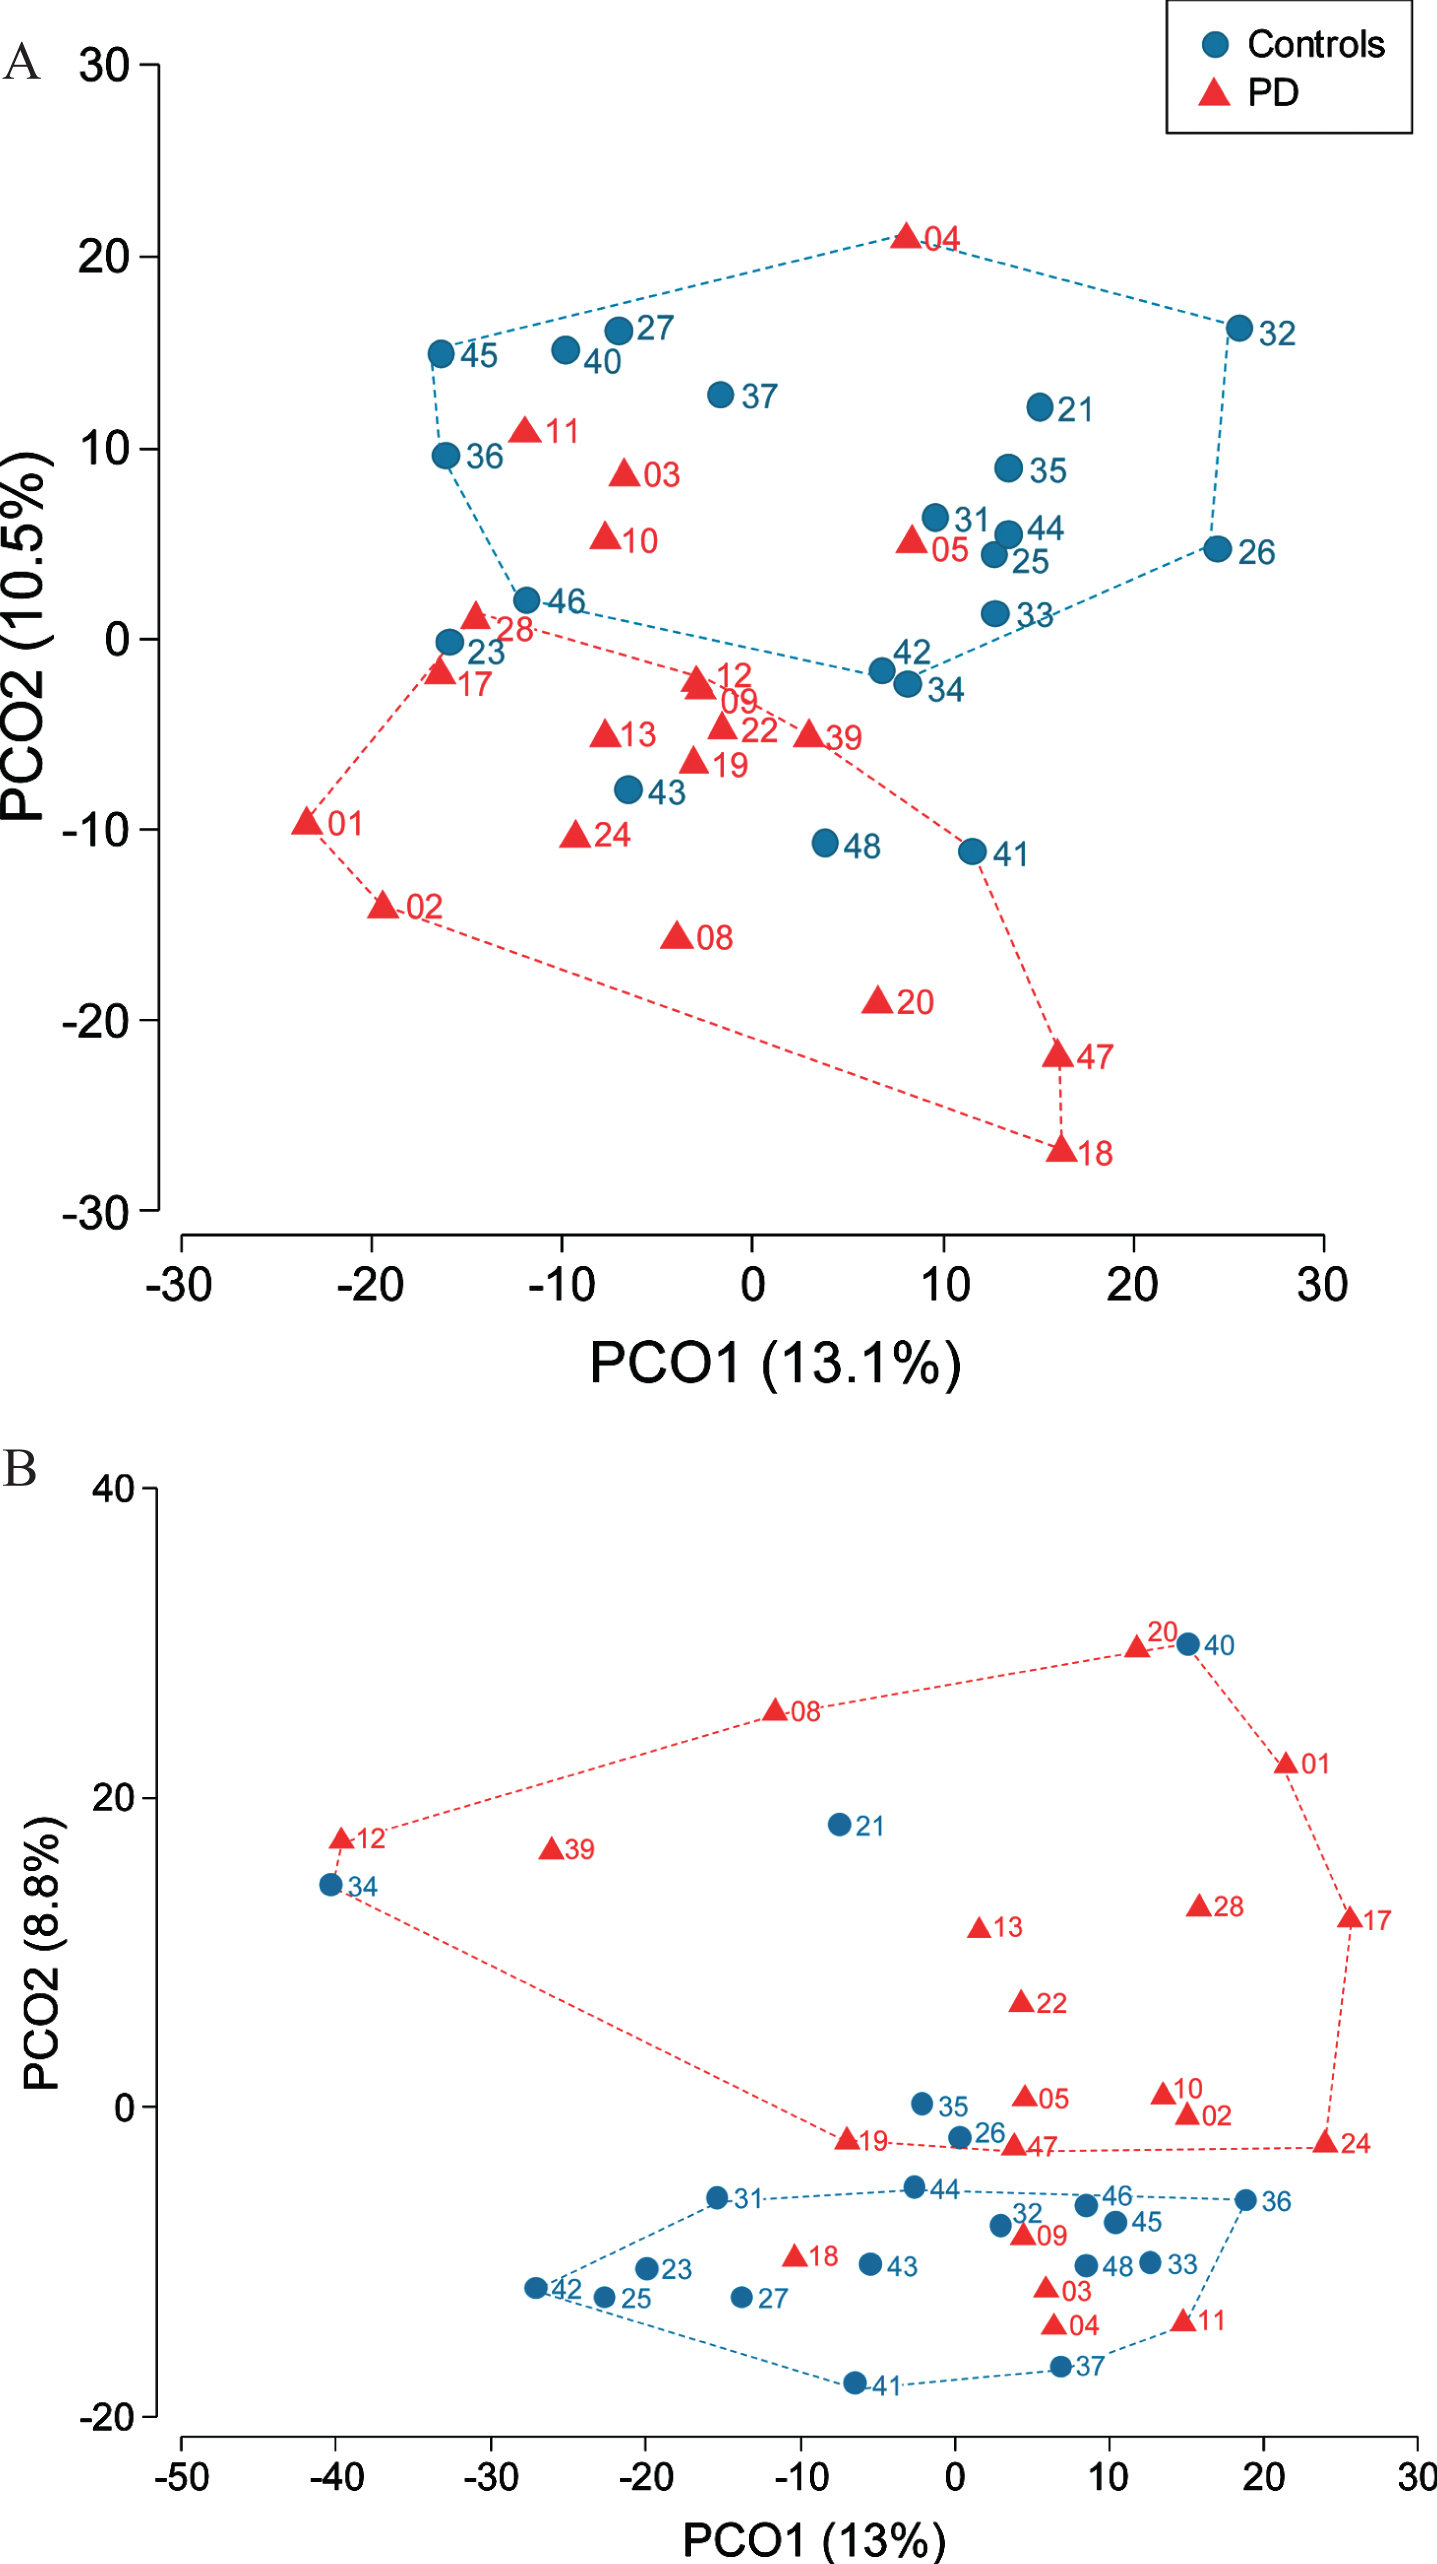 Differential bacterial community composition between controls and PD patients assessed in saliva (A) and dental plaque samples (B). Participant’s number is indicated next to her/his location point.